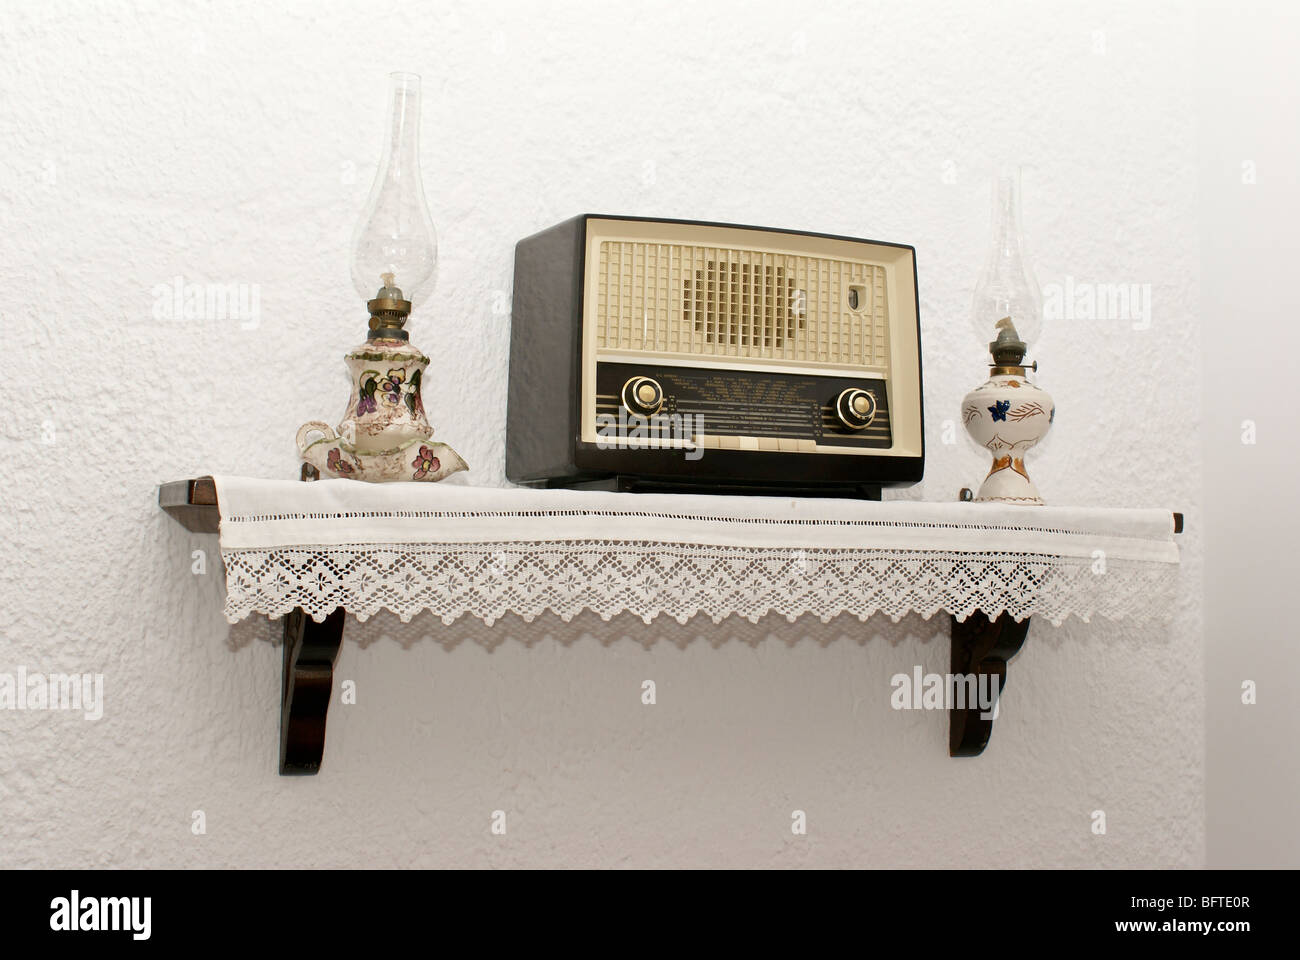 Antique radio on the wall with two old traditional lamps Stock Photo